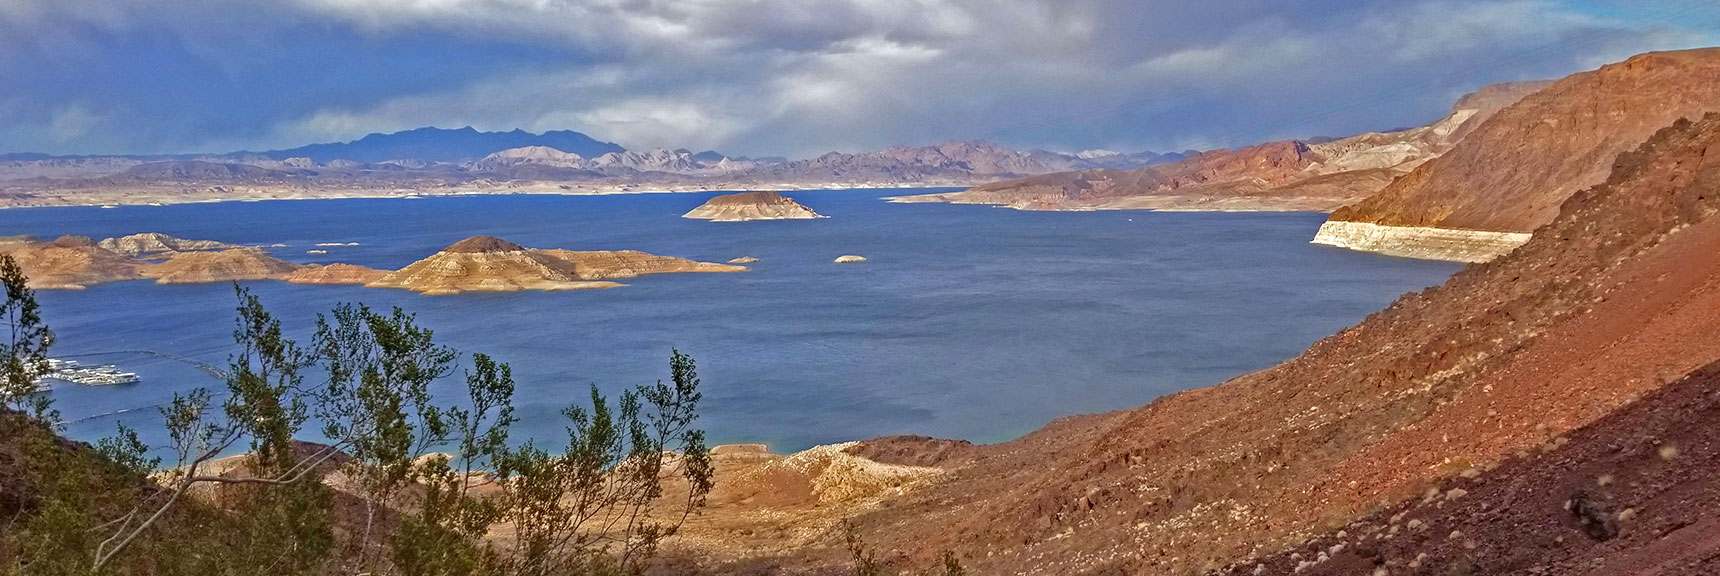 View Across Lake Mead During the Return Trip | Historic Railroad Trail | Lake Mead National Recreation Area, Nevada